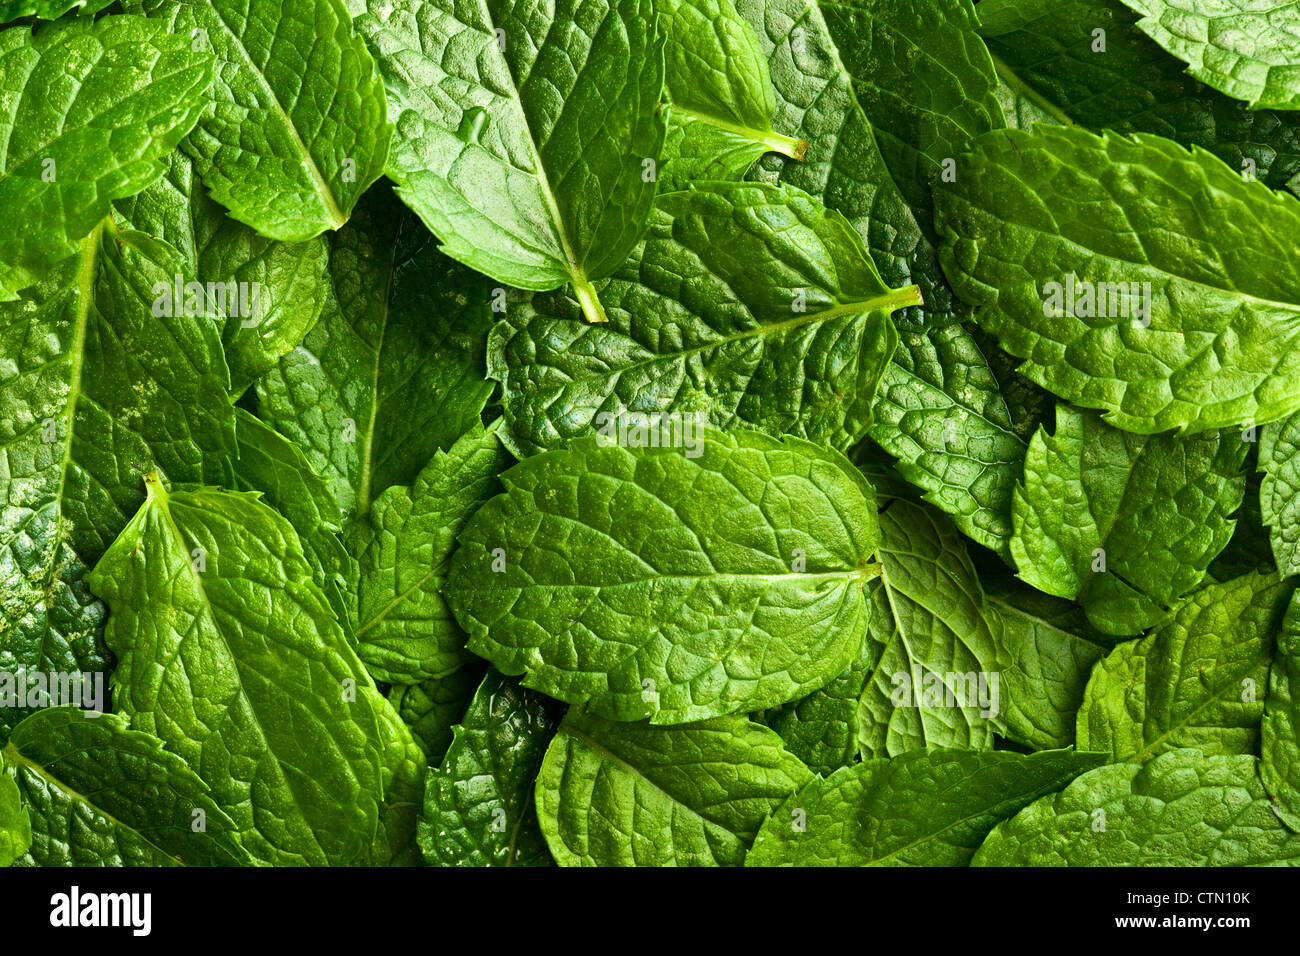 A lot of fresh mint leaves. Stock Photo